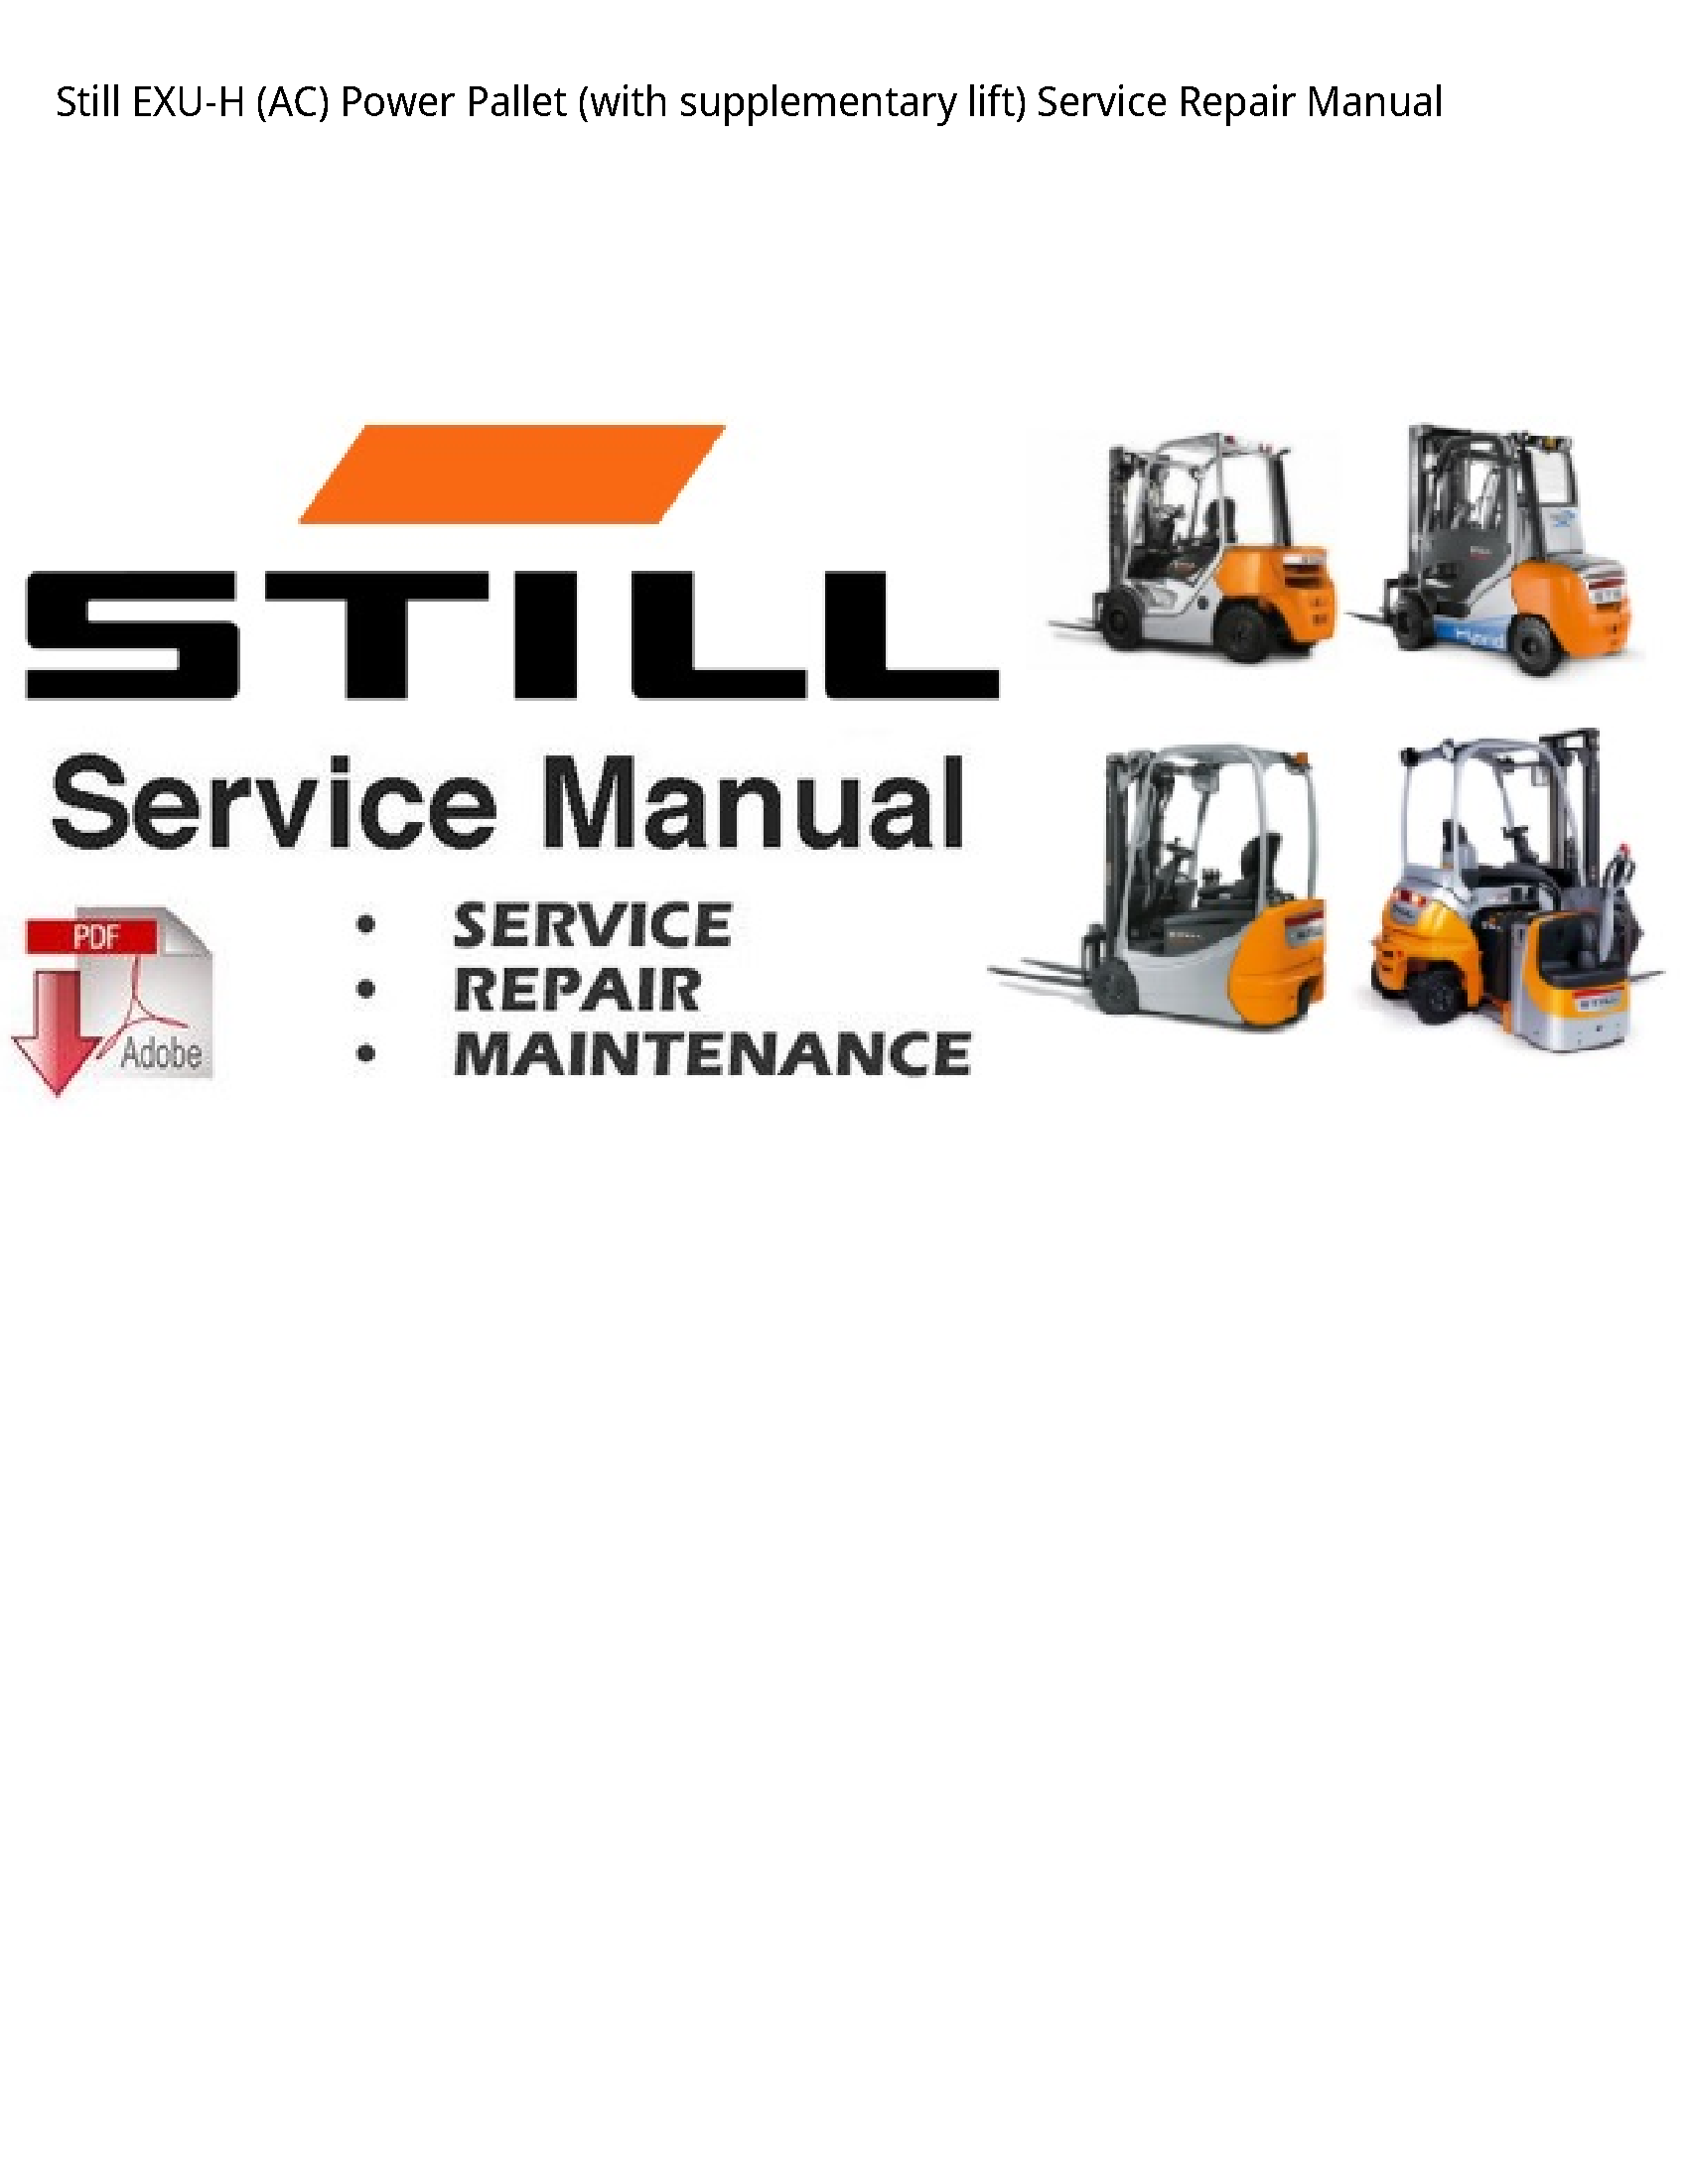 Still EXU-H (AC) Power Pallet (with supplementary lift) manual